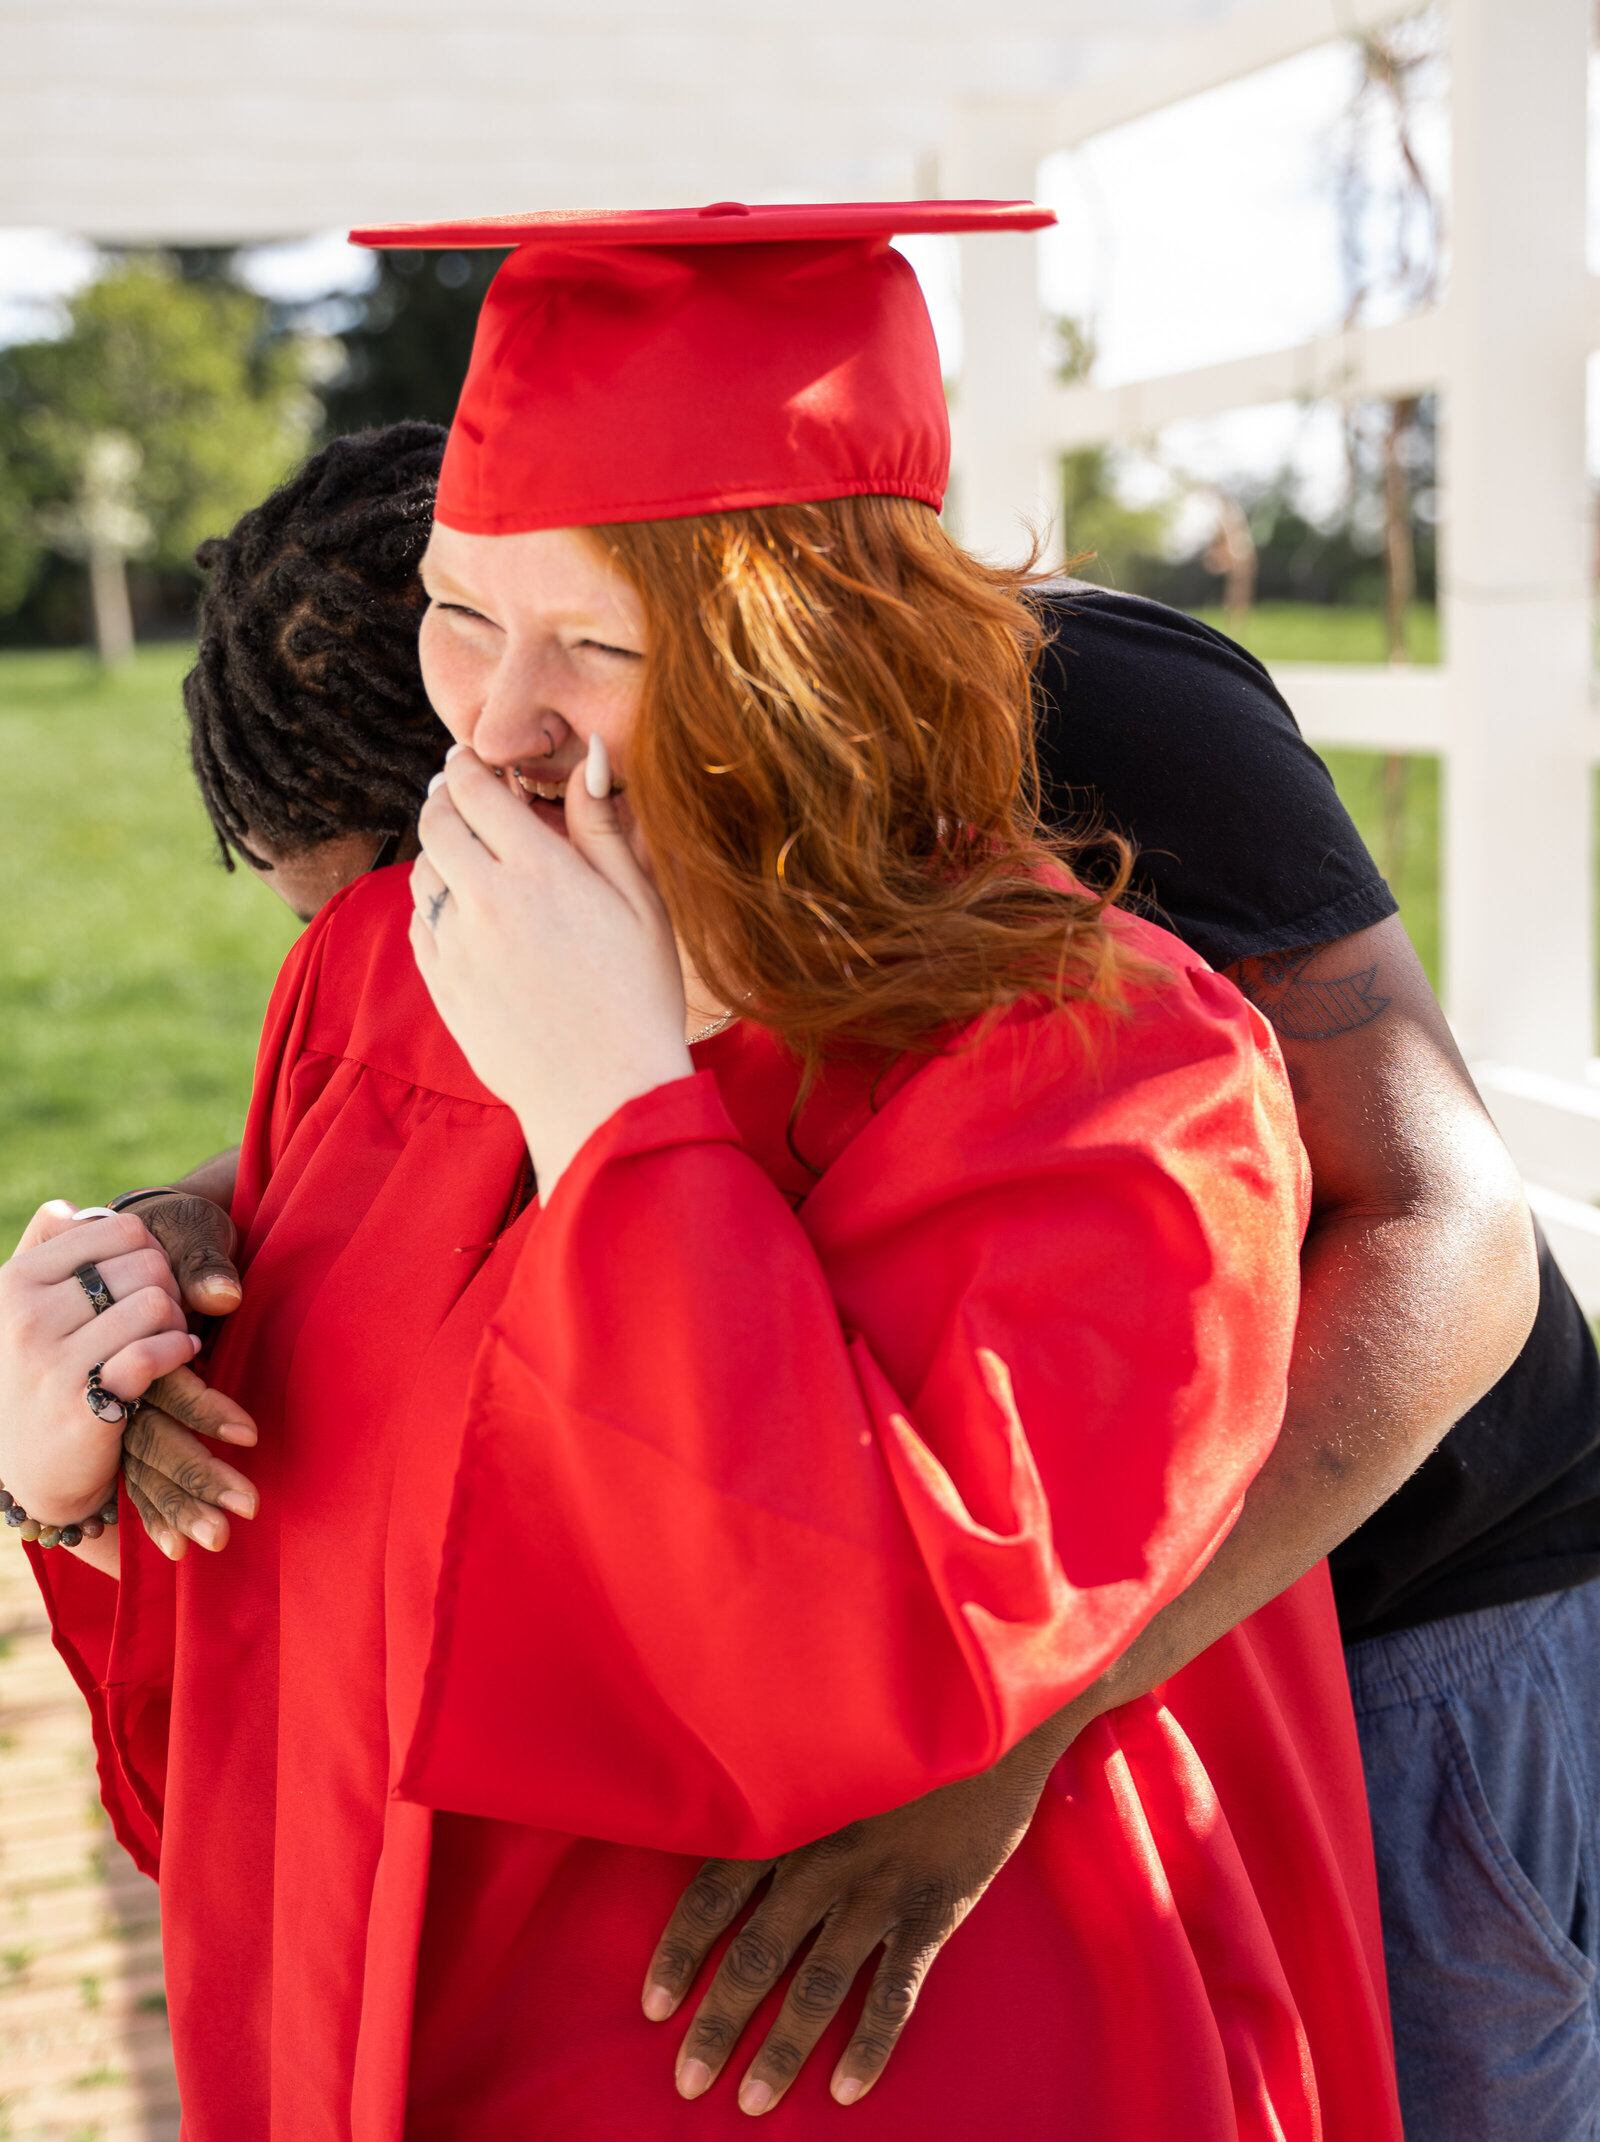 Groveport senior , Natalie Morgan, laughing in her red cap and gown with her boyfriend at the Slate Run Living Historical Farm in Canal Winchester, Ohio.